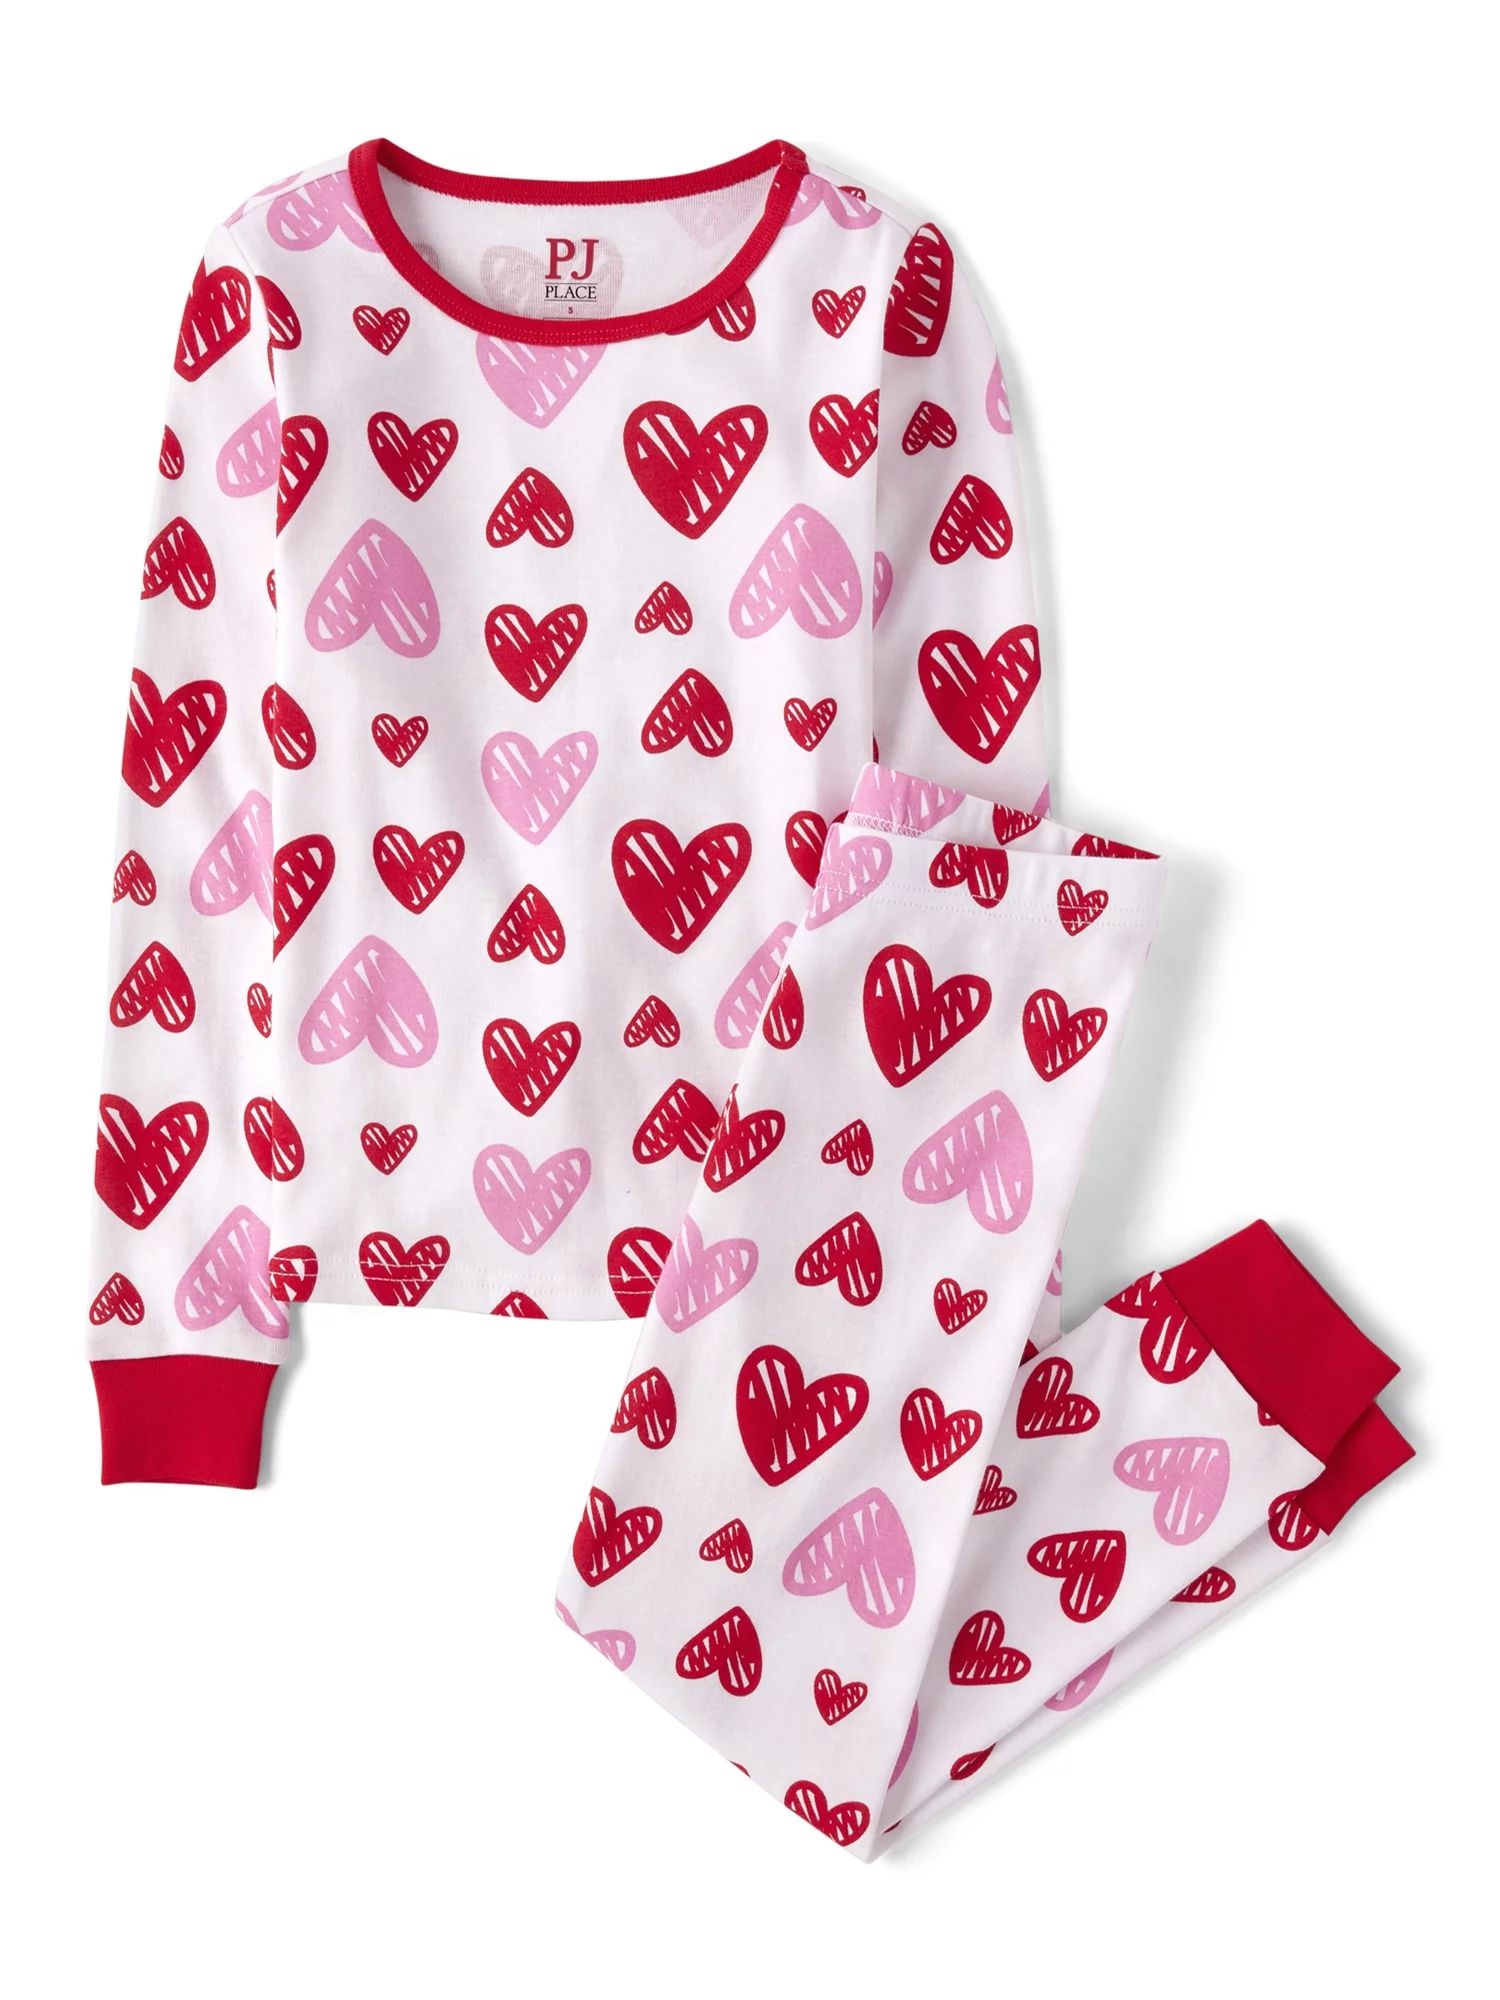 The Children's Place Girls Heart Long Sleeve Top and Pant 2-Piece Pajama Set, Sizes 4-16 | Walmart (US)